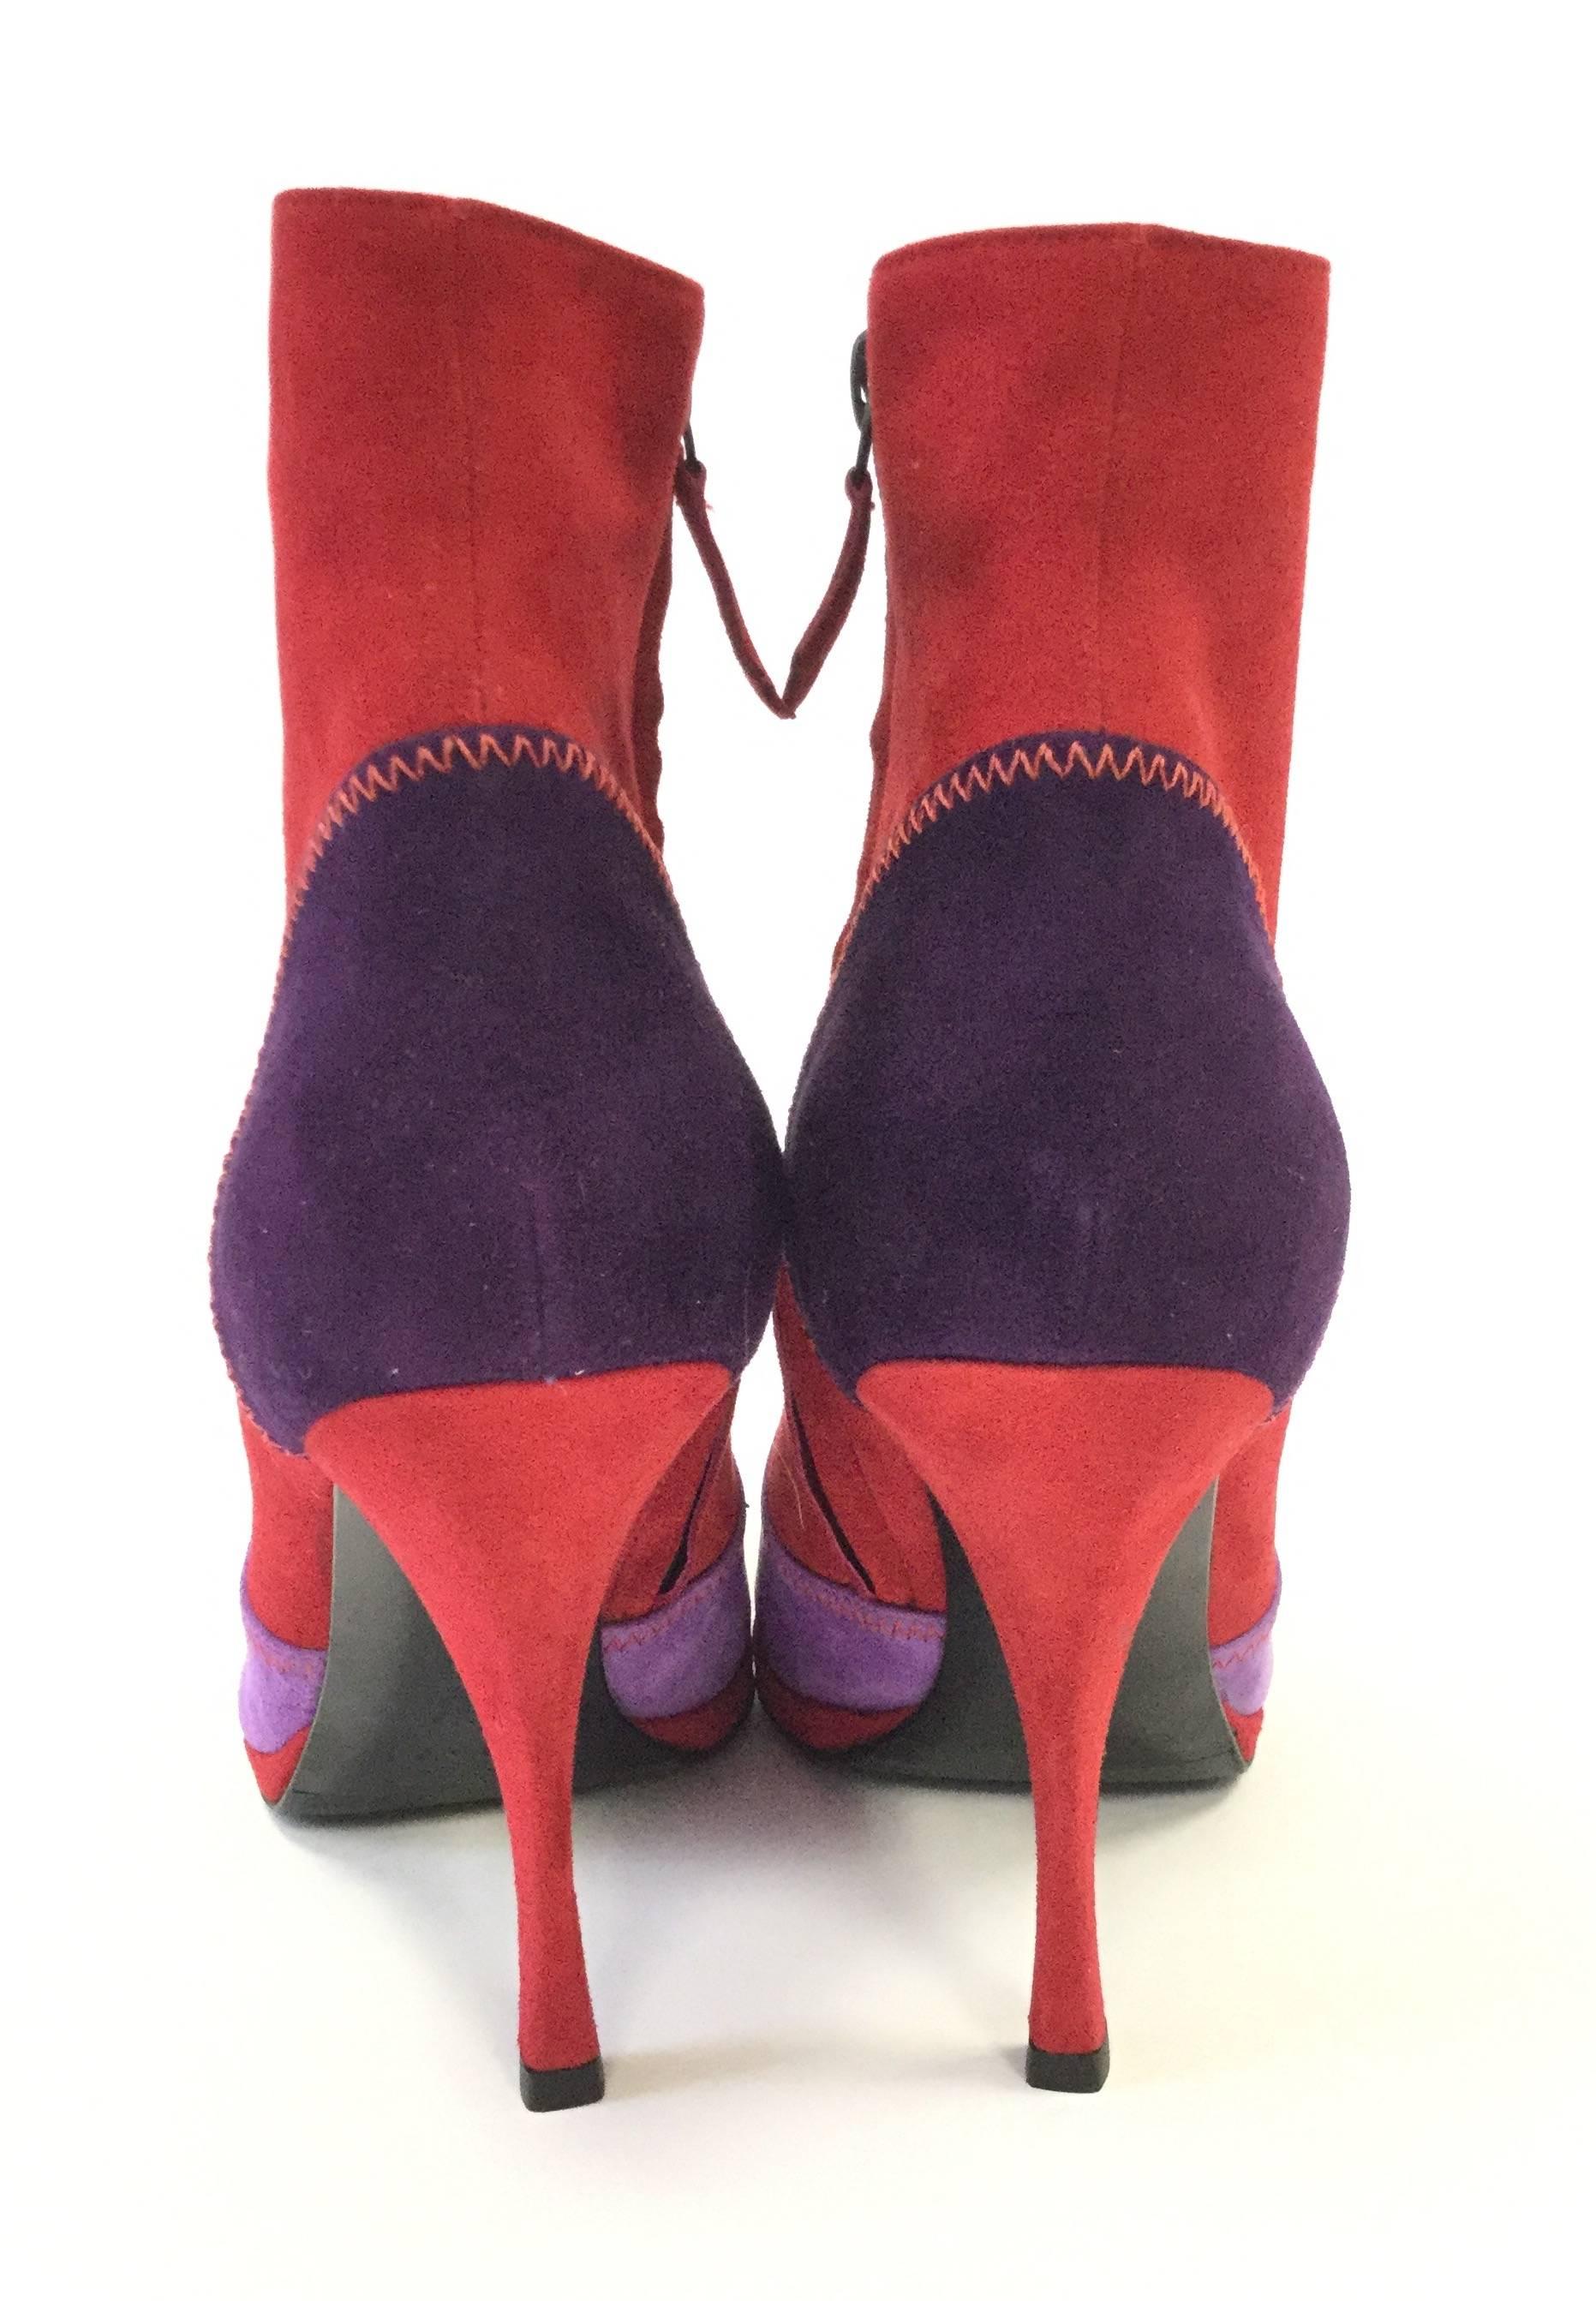 violet and red booties